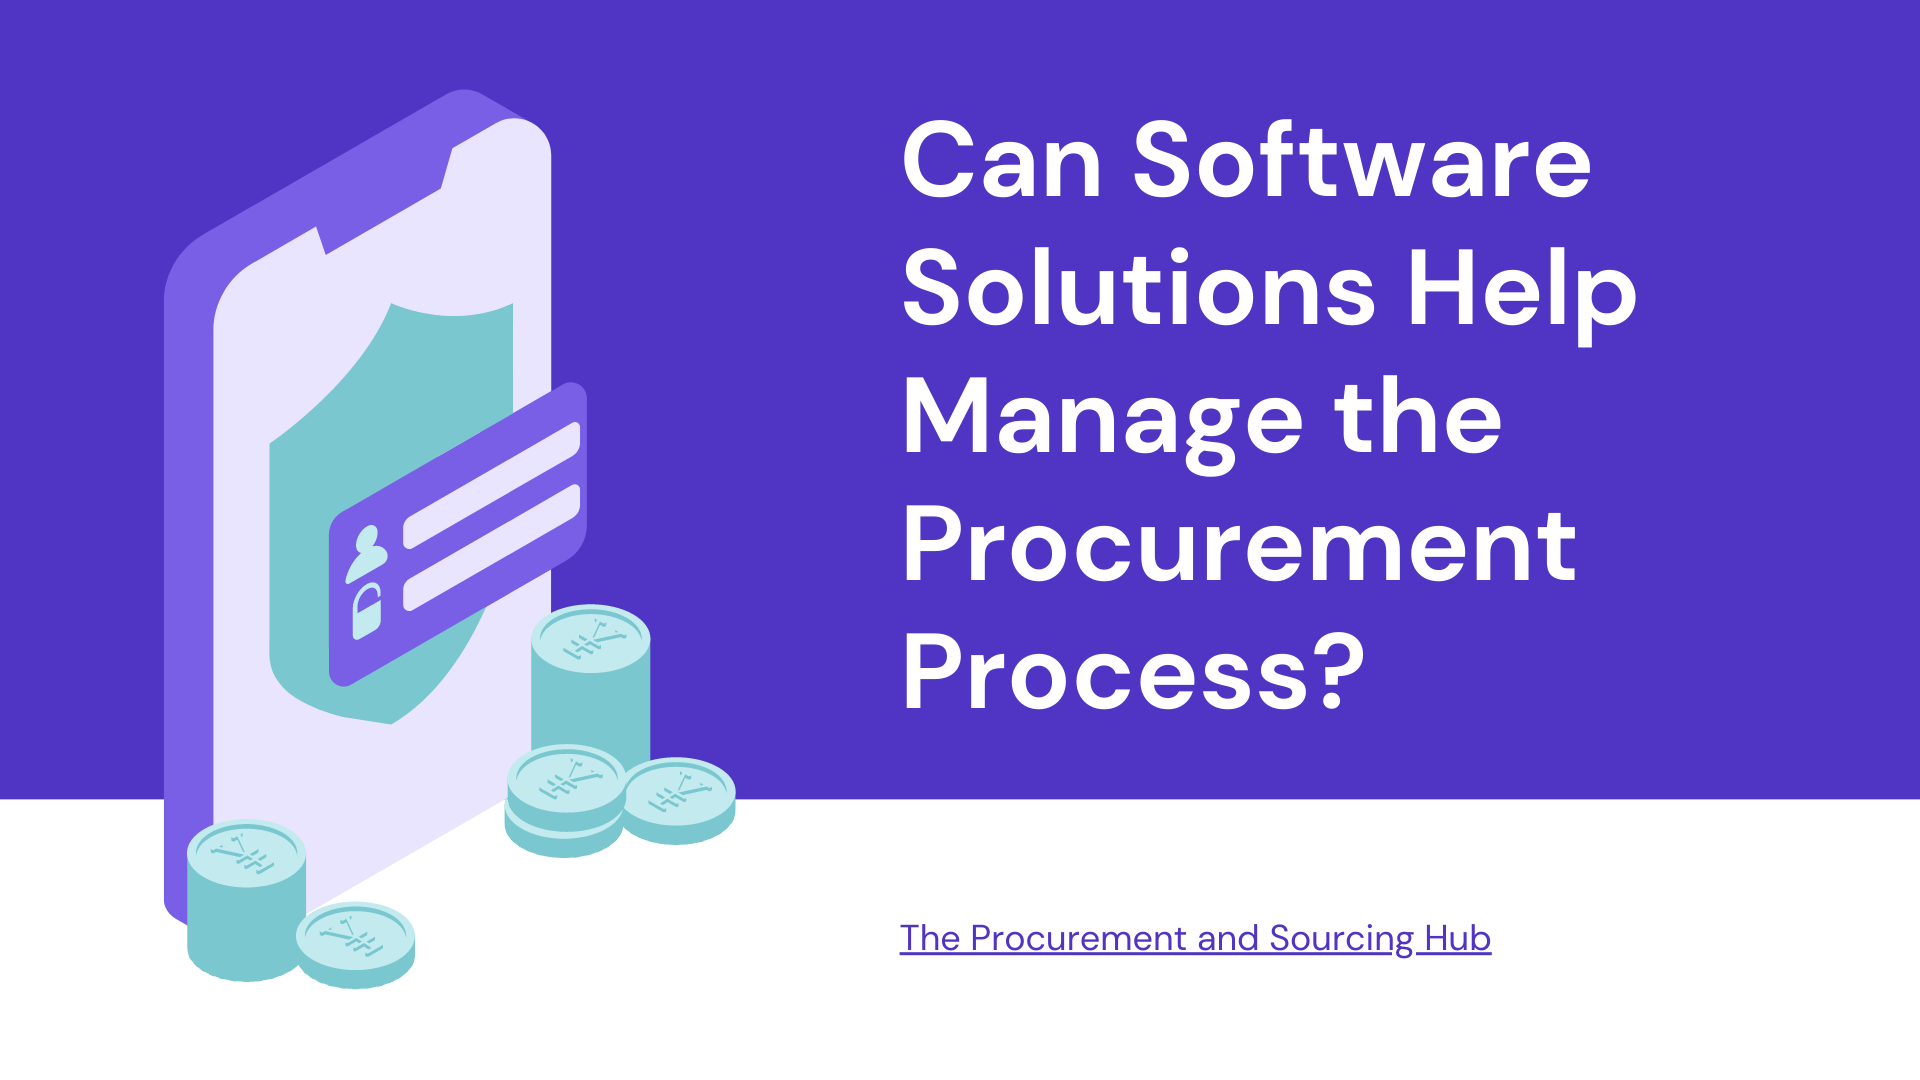 Can Software Solutions Help Manage the Procurement Process